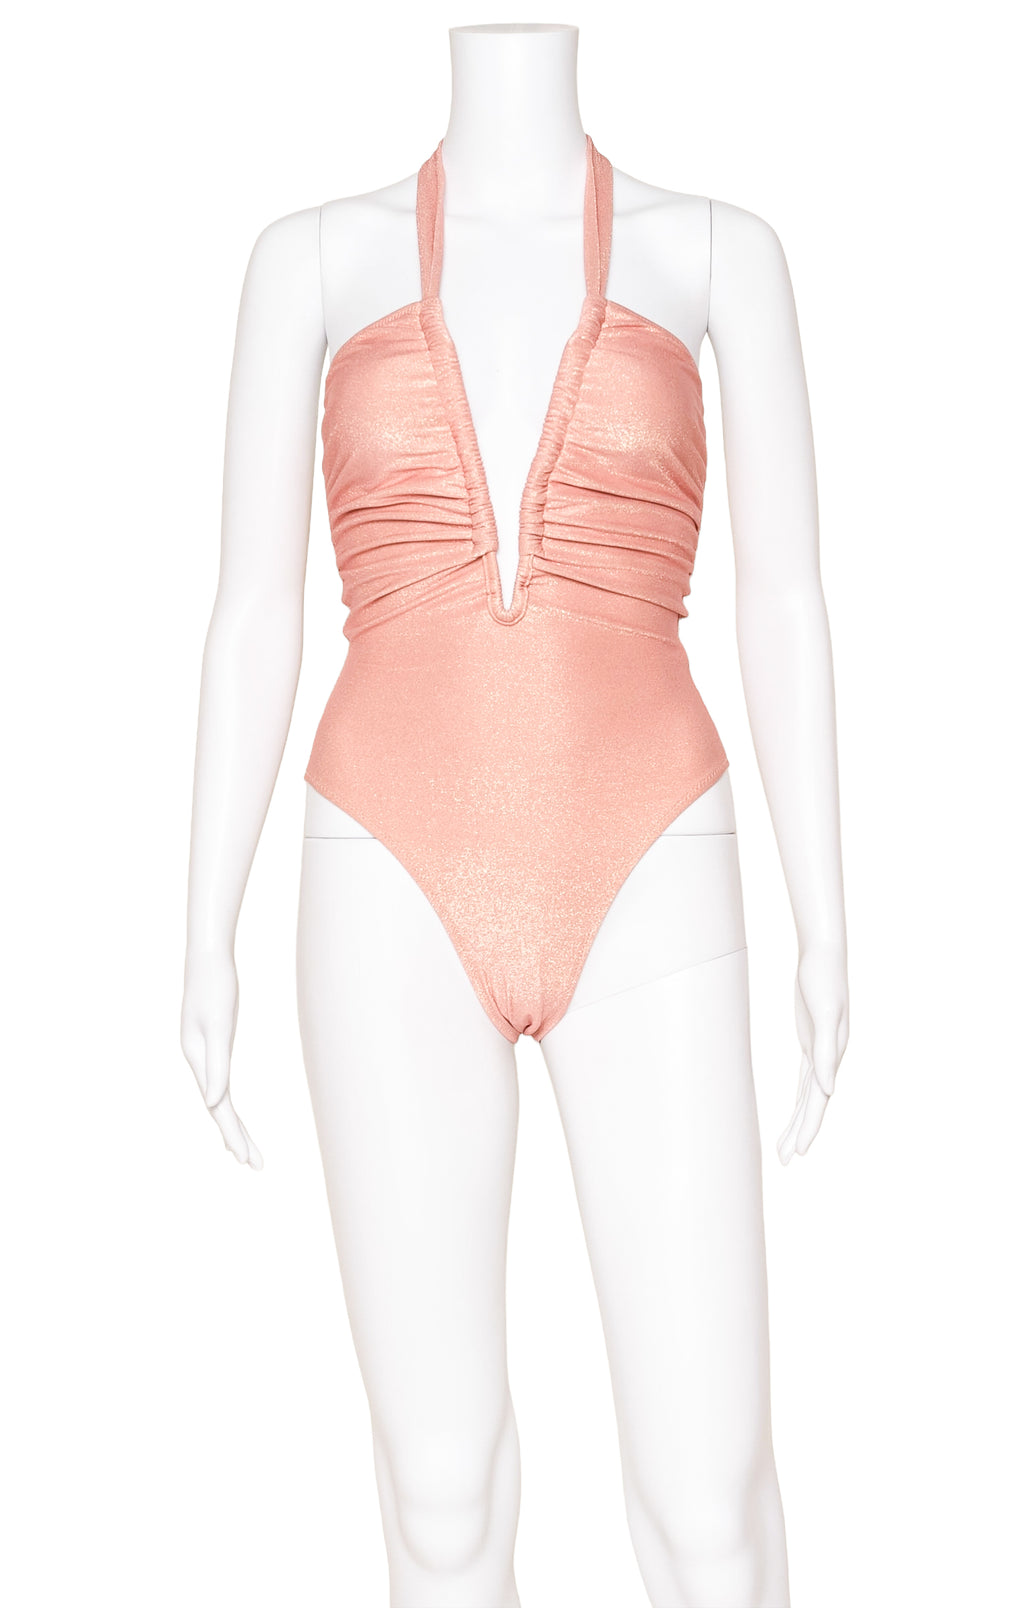 SHANI SHEMER (NEW) with tags Swimsuit Size: XS